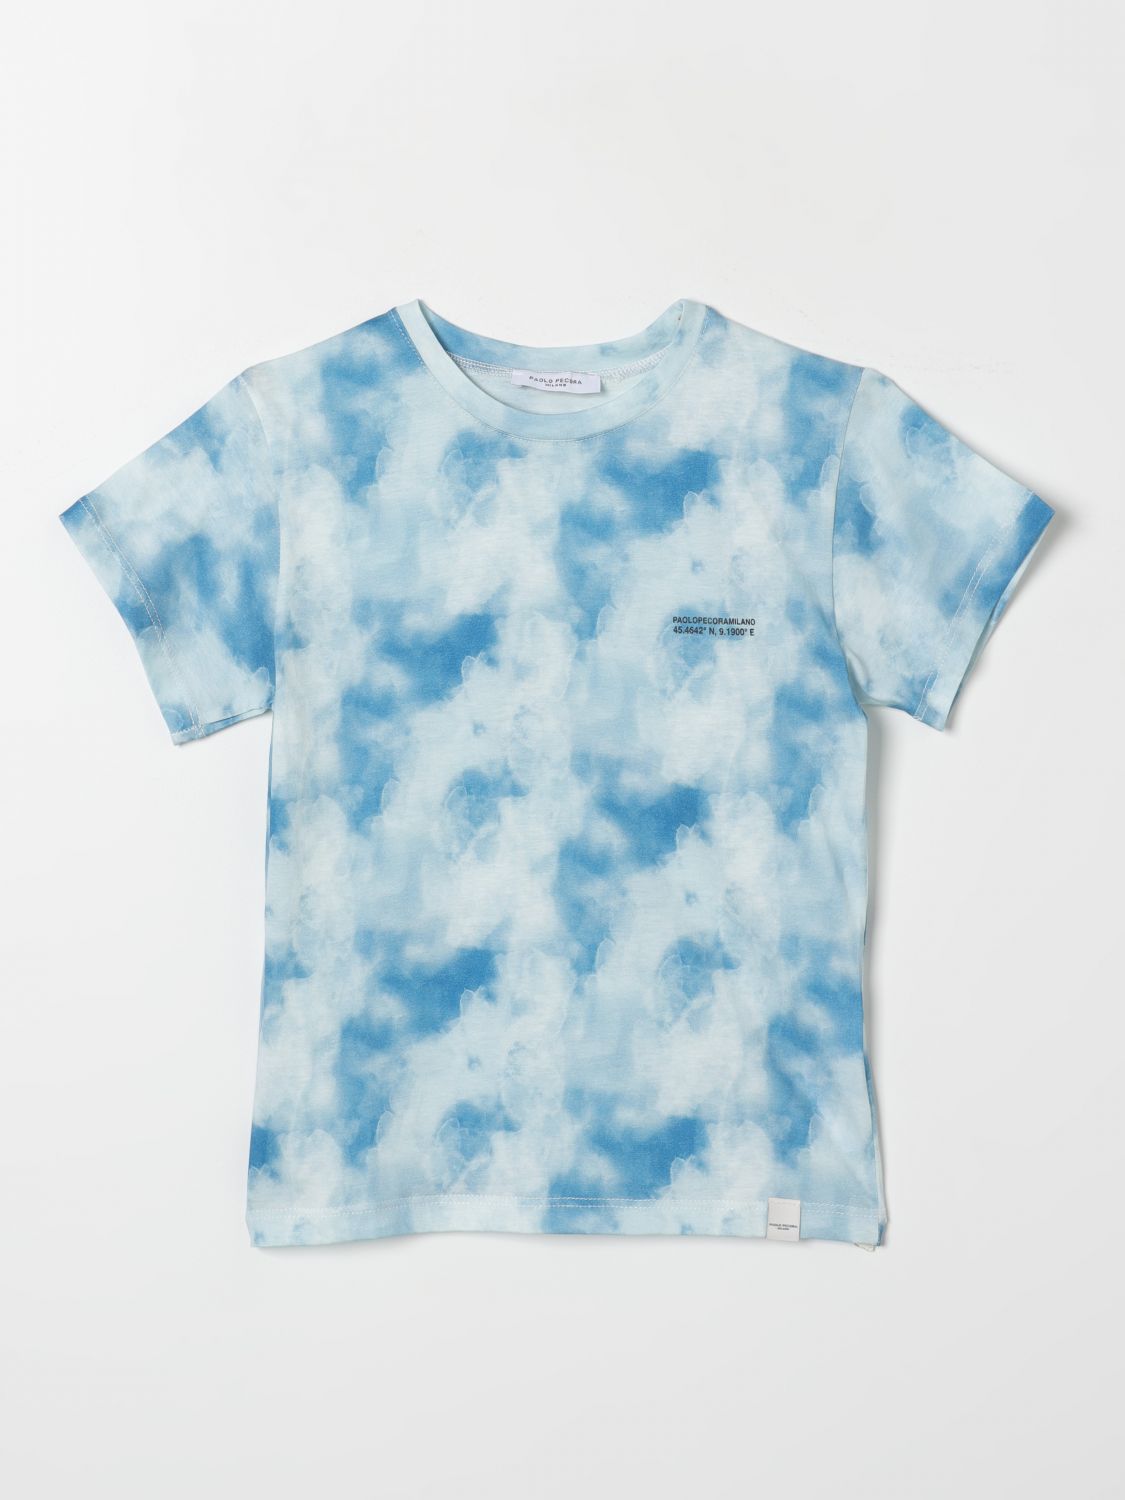 Paolo Pecora T-shirt  Kids Color Dust In 灰褐色